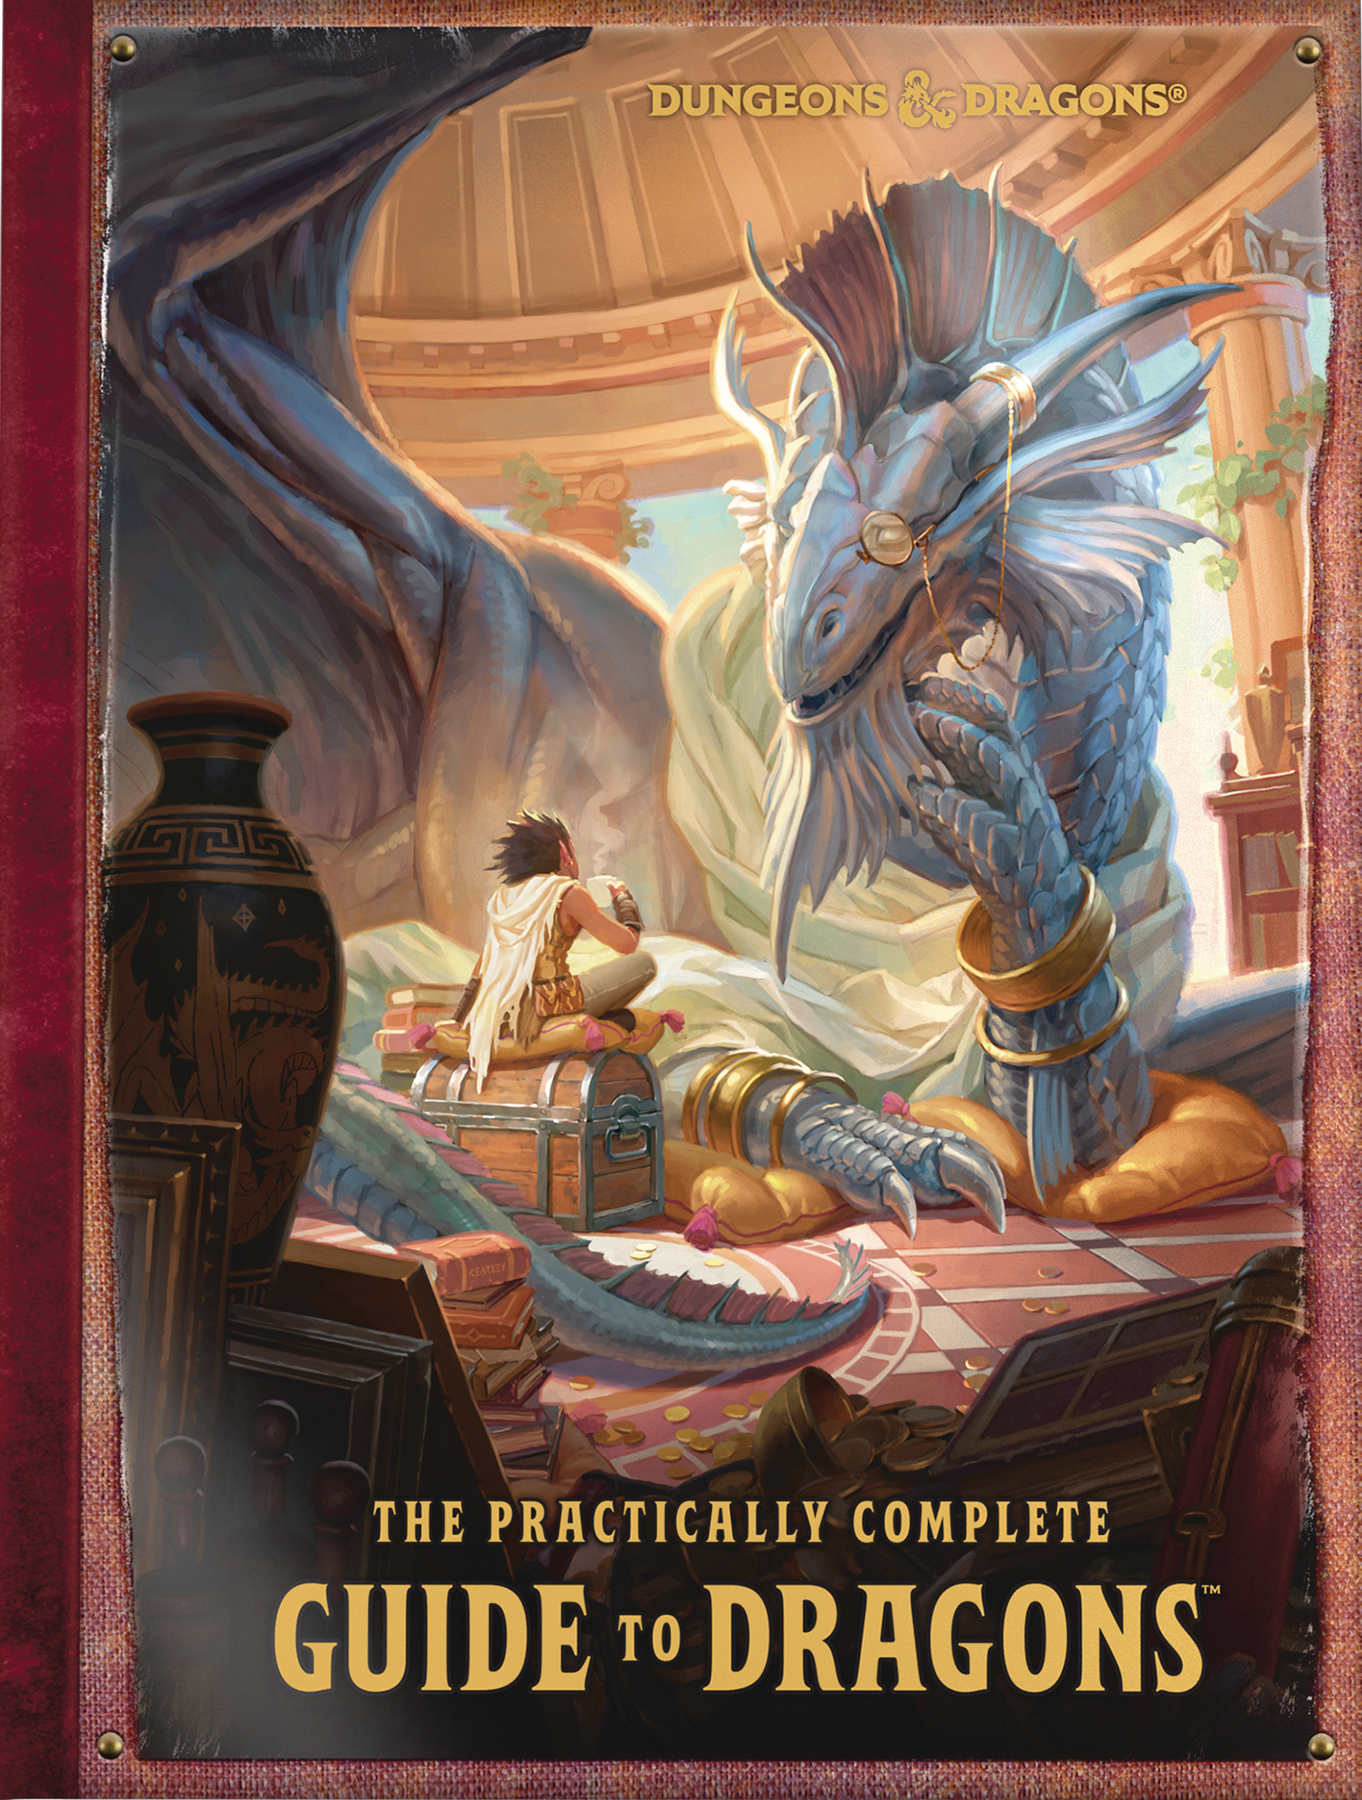 Dungeons & Dragons RPG The Practically Complete Guide To Dragons Hardcover